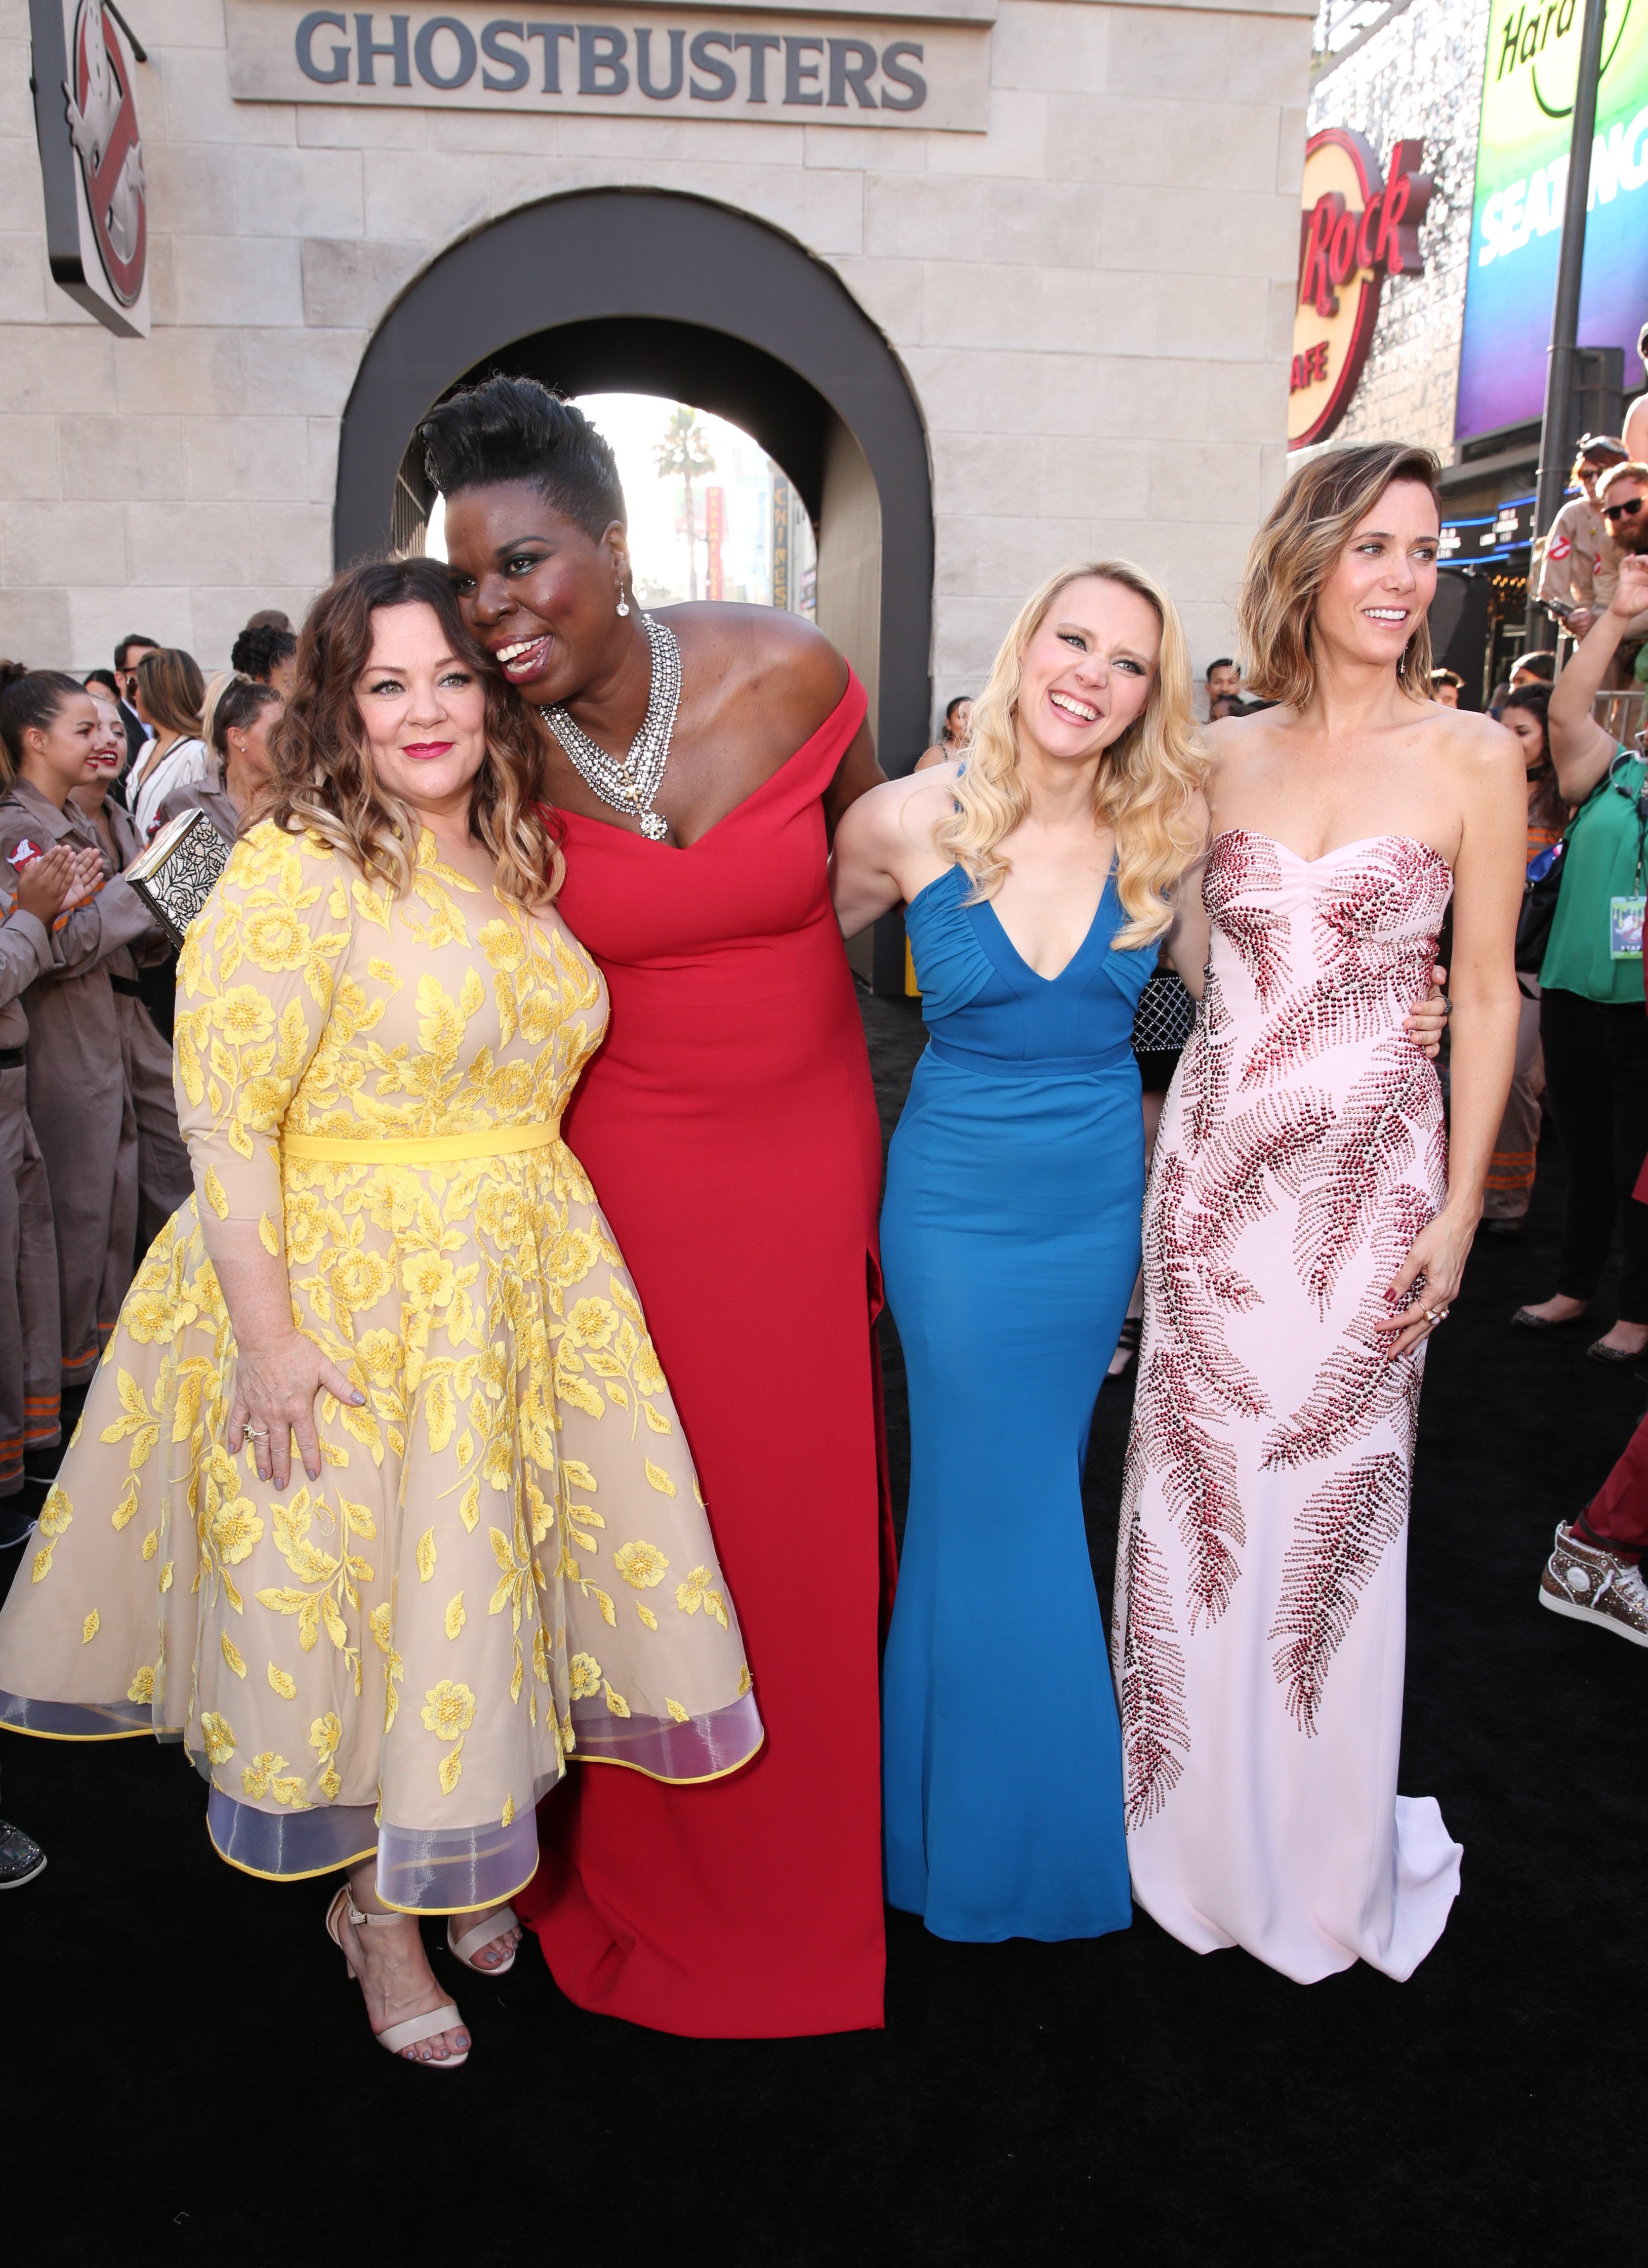  Melissa McCarthy, Leslie Jones, Kate McKinnon and Kristen Wiig at the premiere of "Ghostbusters" on July 9, 2016, in California | Source: Getty Images